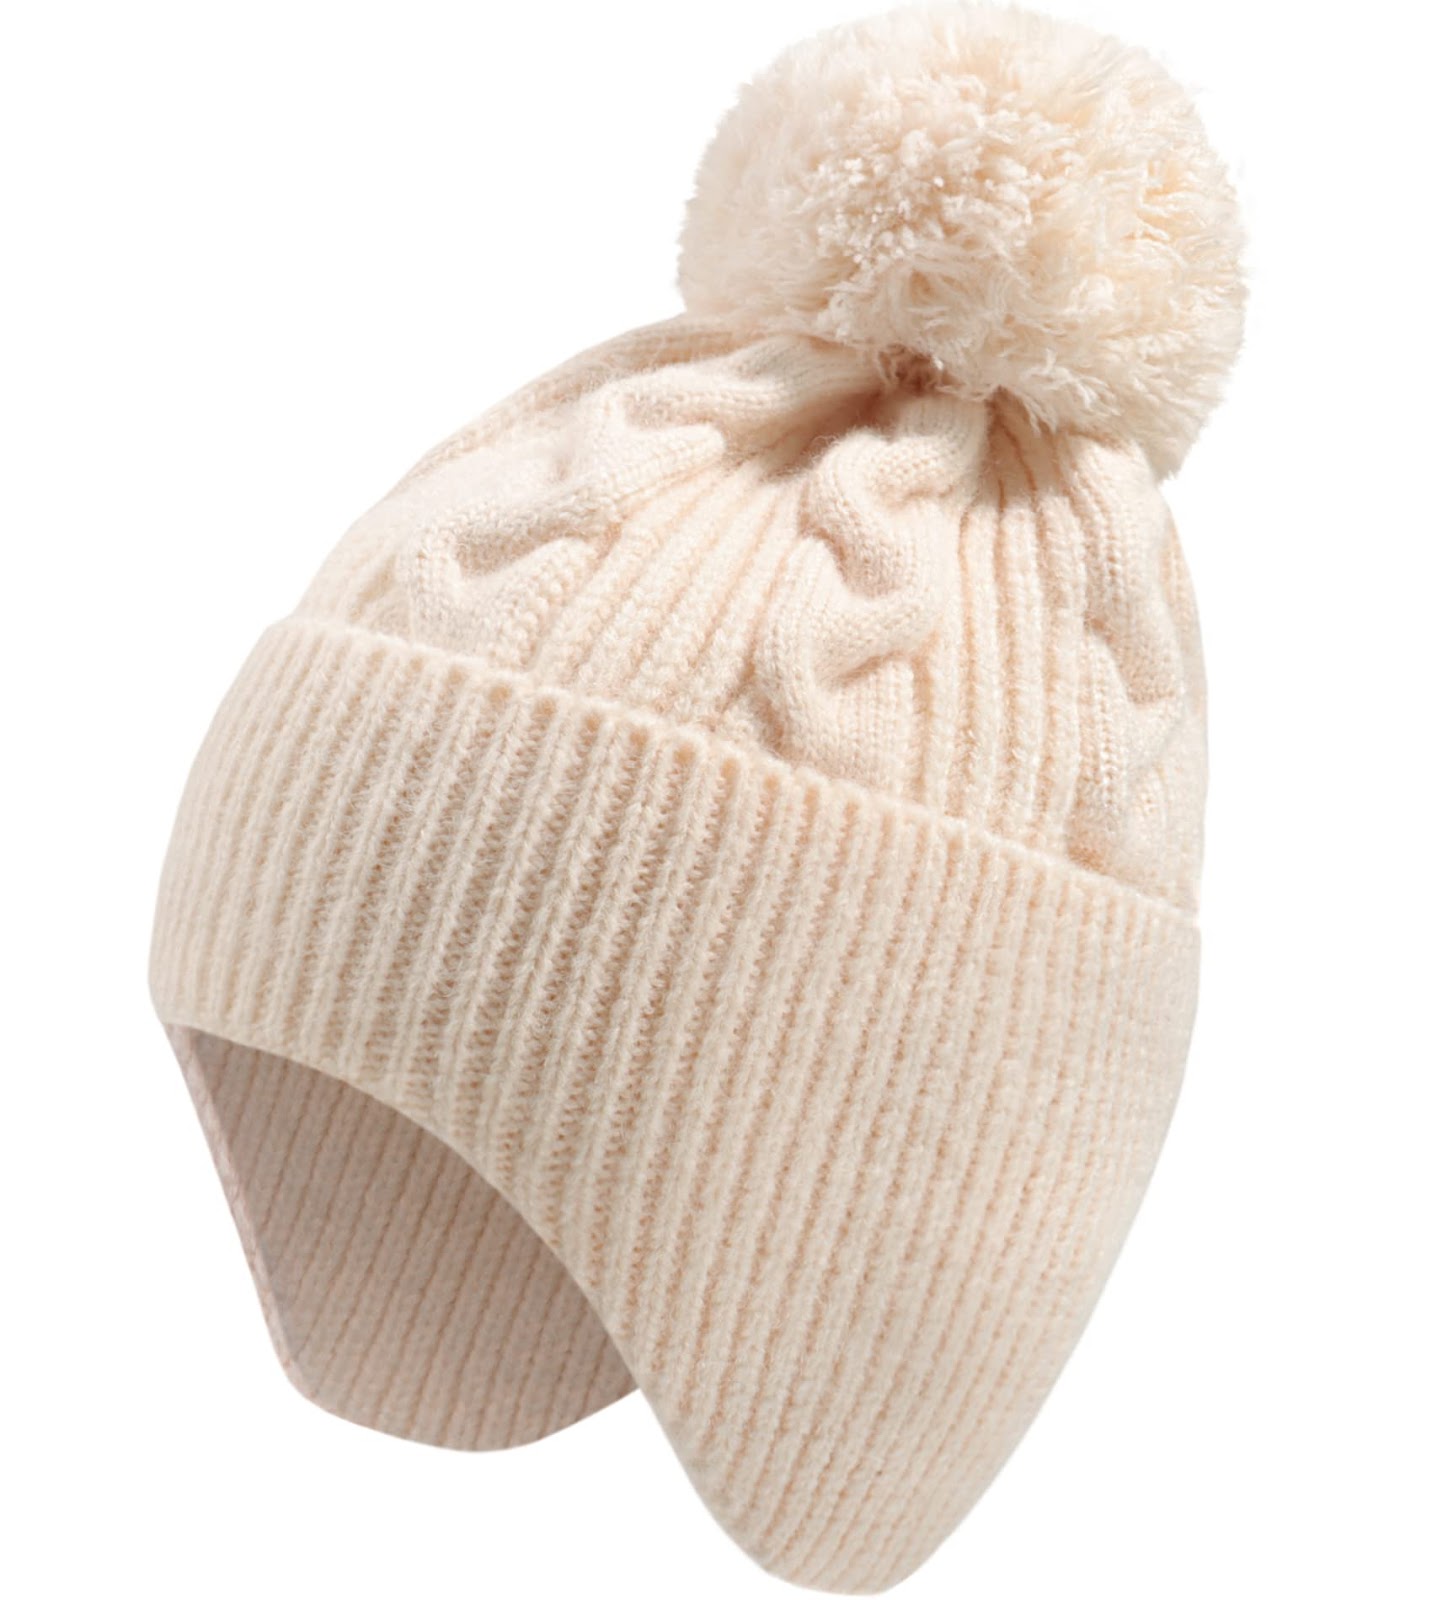 KMOLY Womens Winter Knitted Beanie Hat with Pom Pom Slouchy Warm Skull Cap Beanies with Earflaps for Women Beige